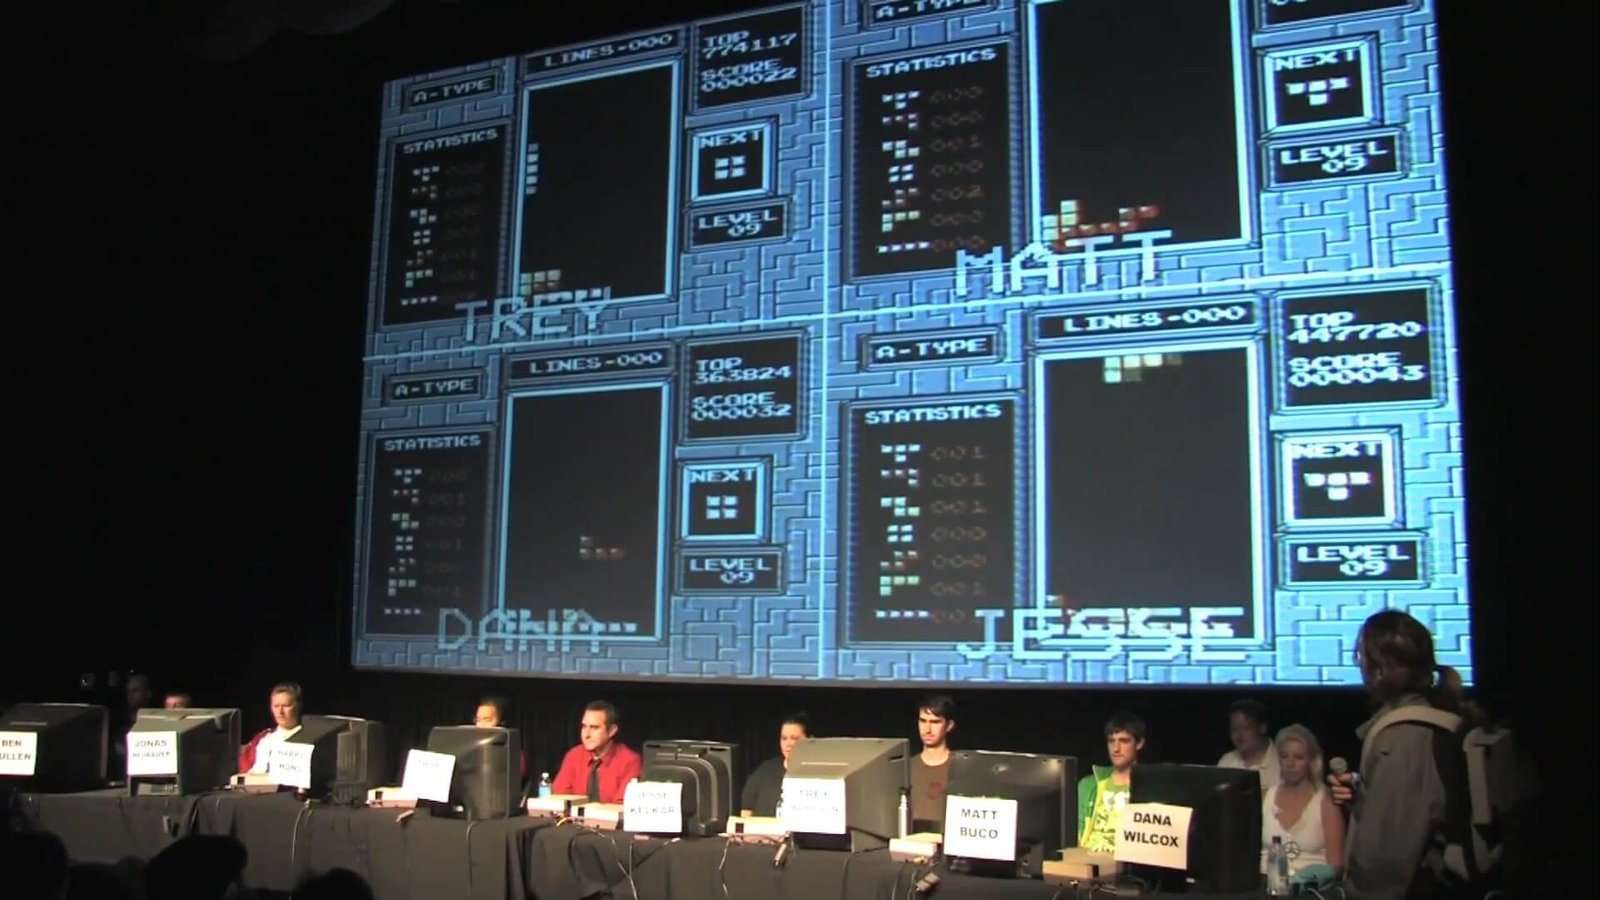 The Original Classic Tetris World Championship Players: Where Are They Now?  - Tetris Interest